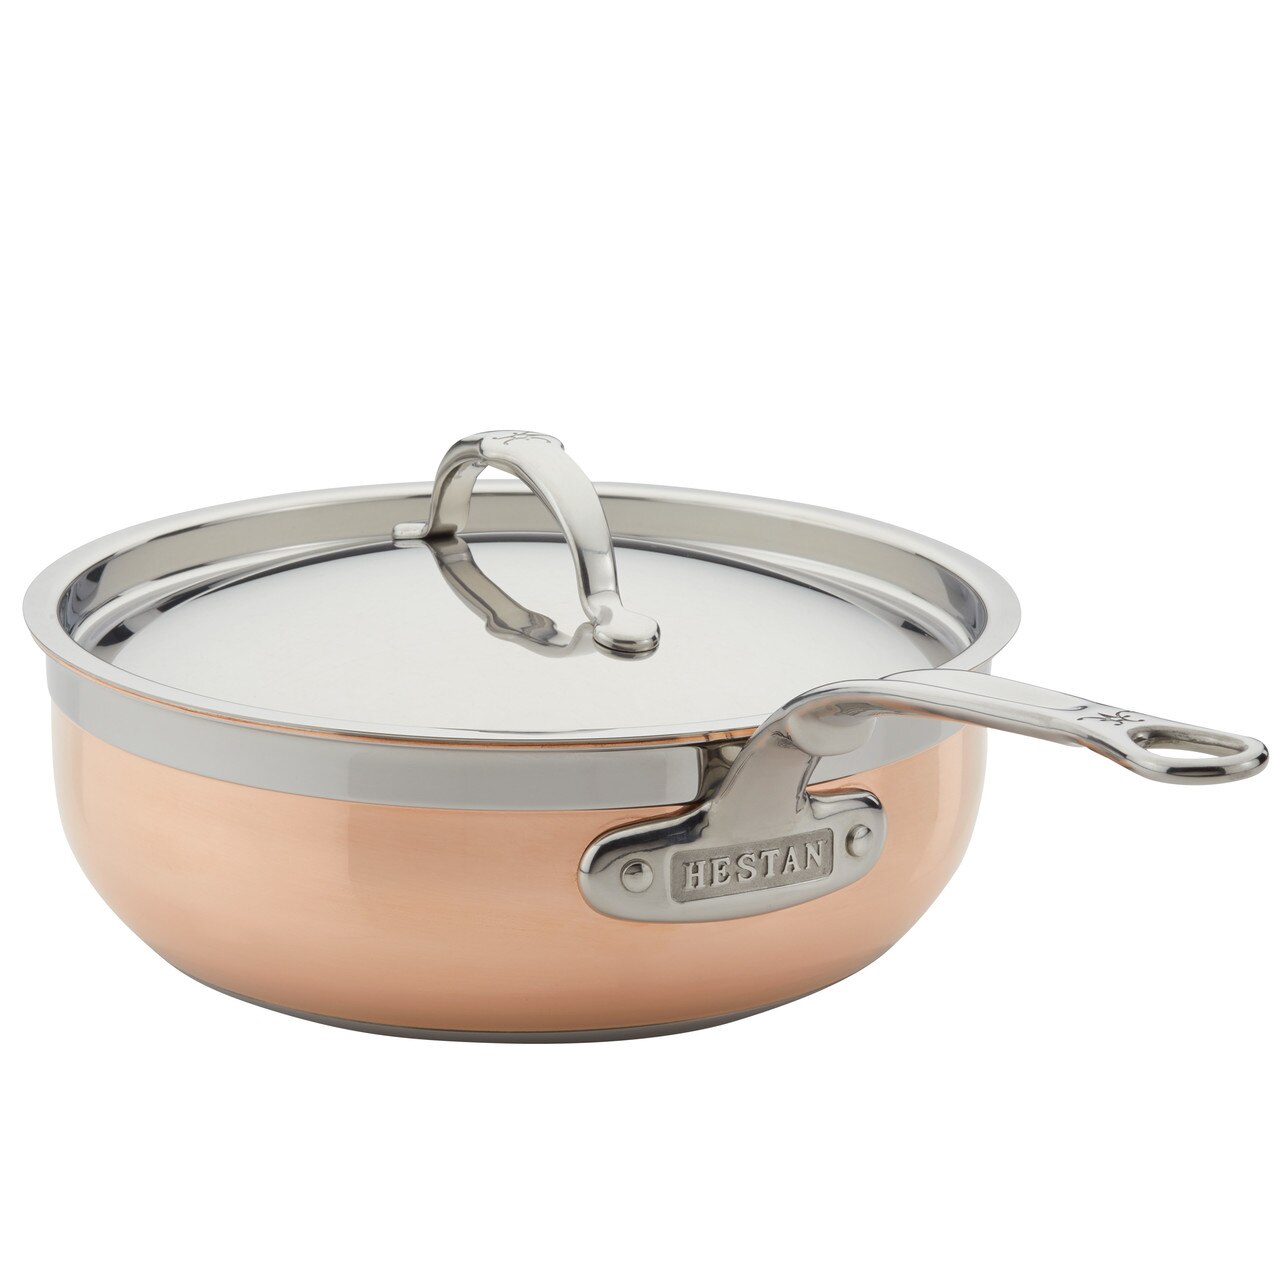 All-Clad c4 Copper 8 Inch Fry Pan